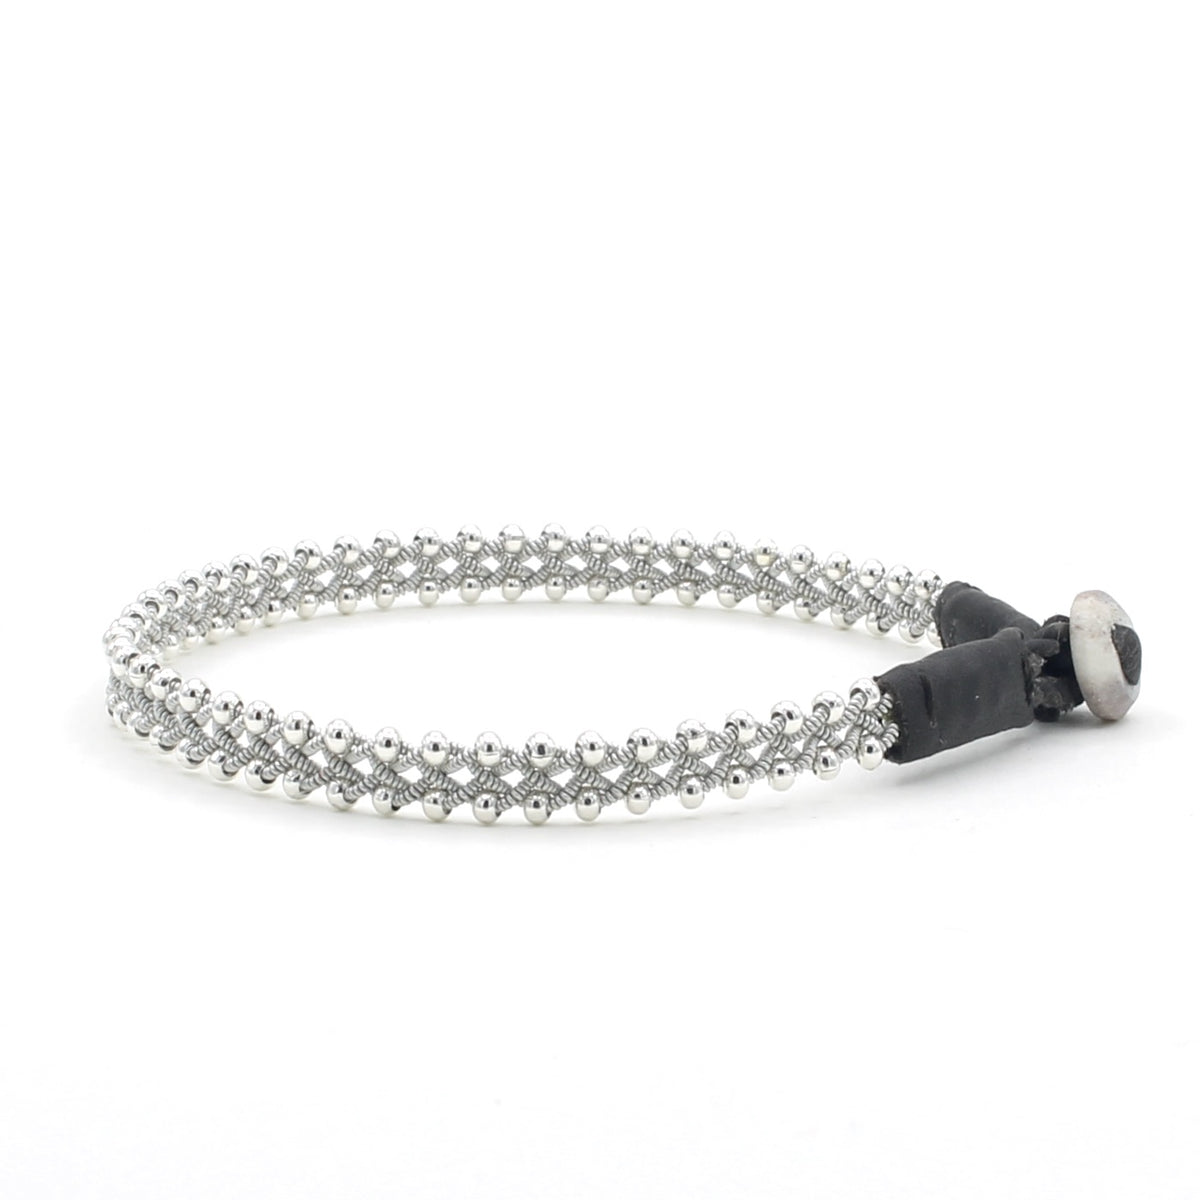 Lucia Narrow Braid with Silver Beads